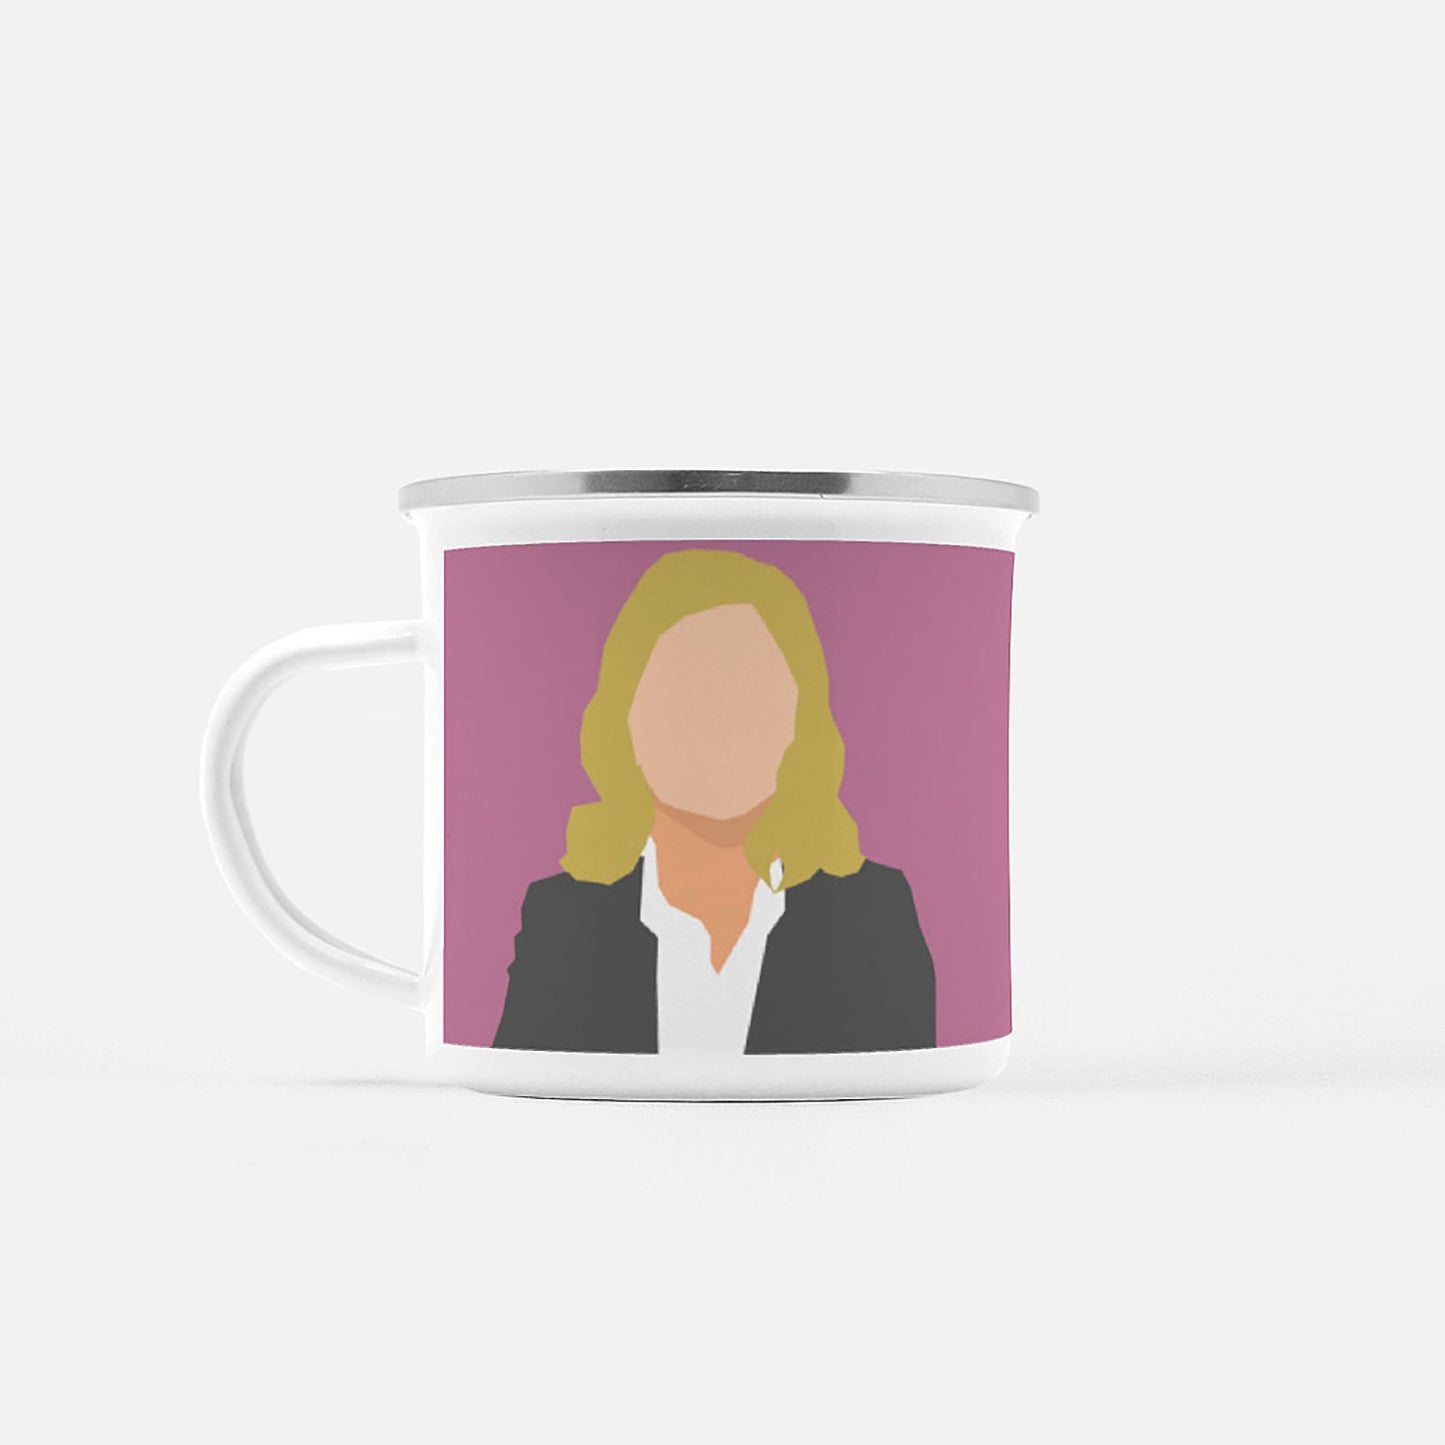 parks and recreation mug featuring Leslie Knope and quote 